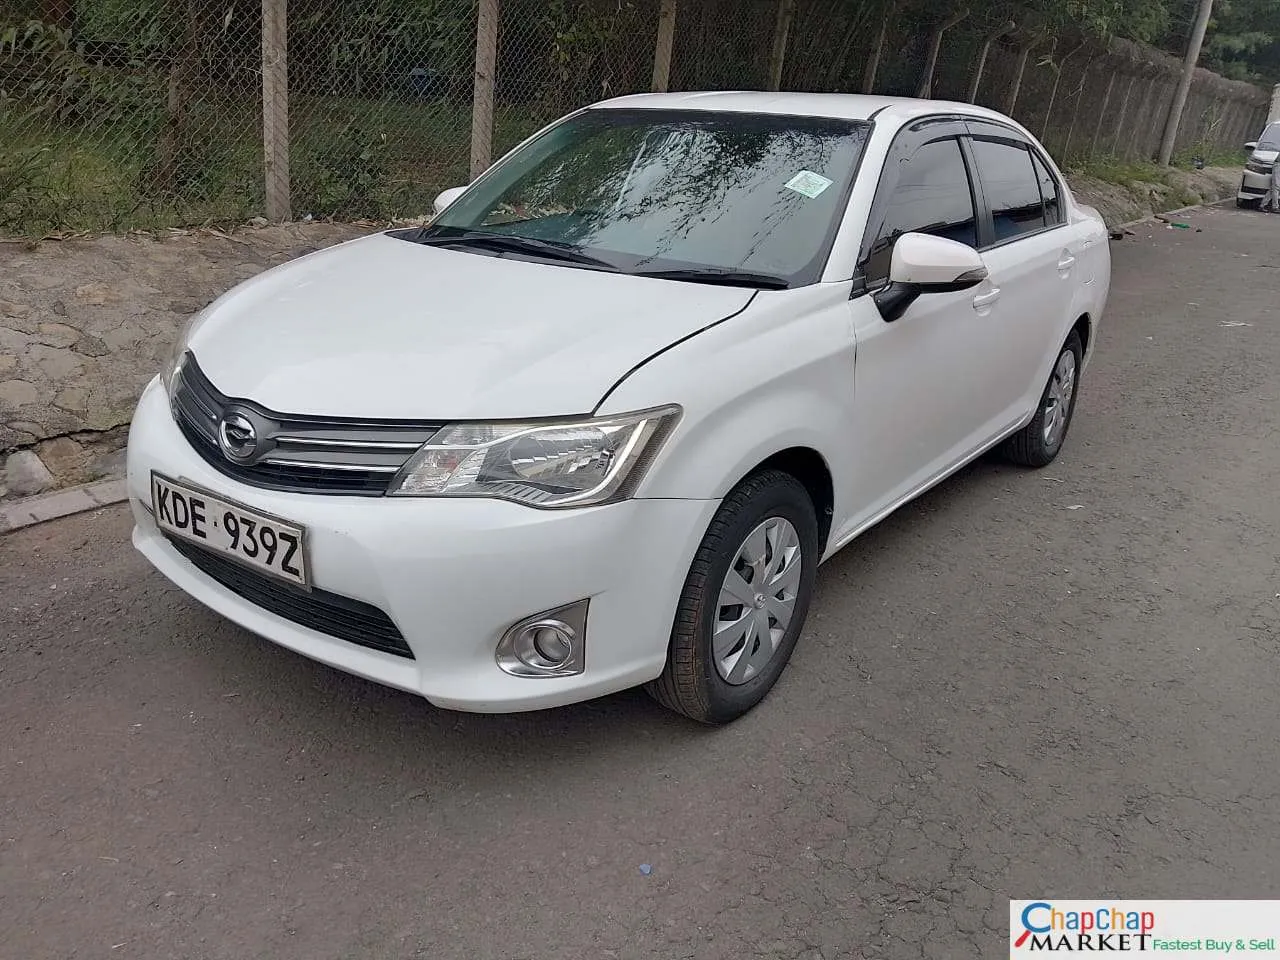 Cars Cars For Sale-Toyota AXIO Kenya 🔥 CHEAPEST You pay 30% Deposit Trade in Ok Toyota Axio For Sale in Kenya hire purchase installment exclusive 7